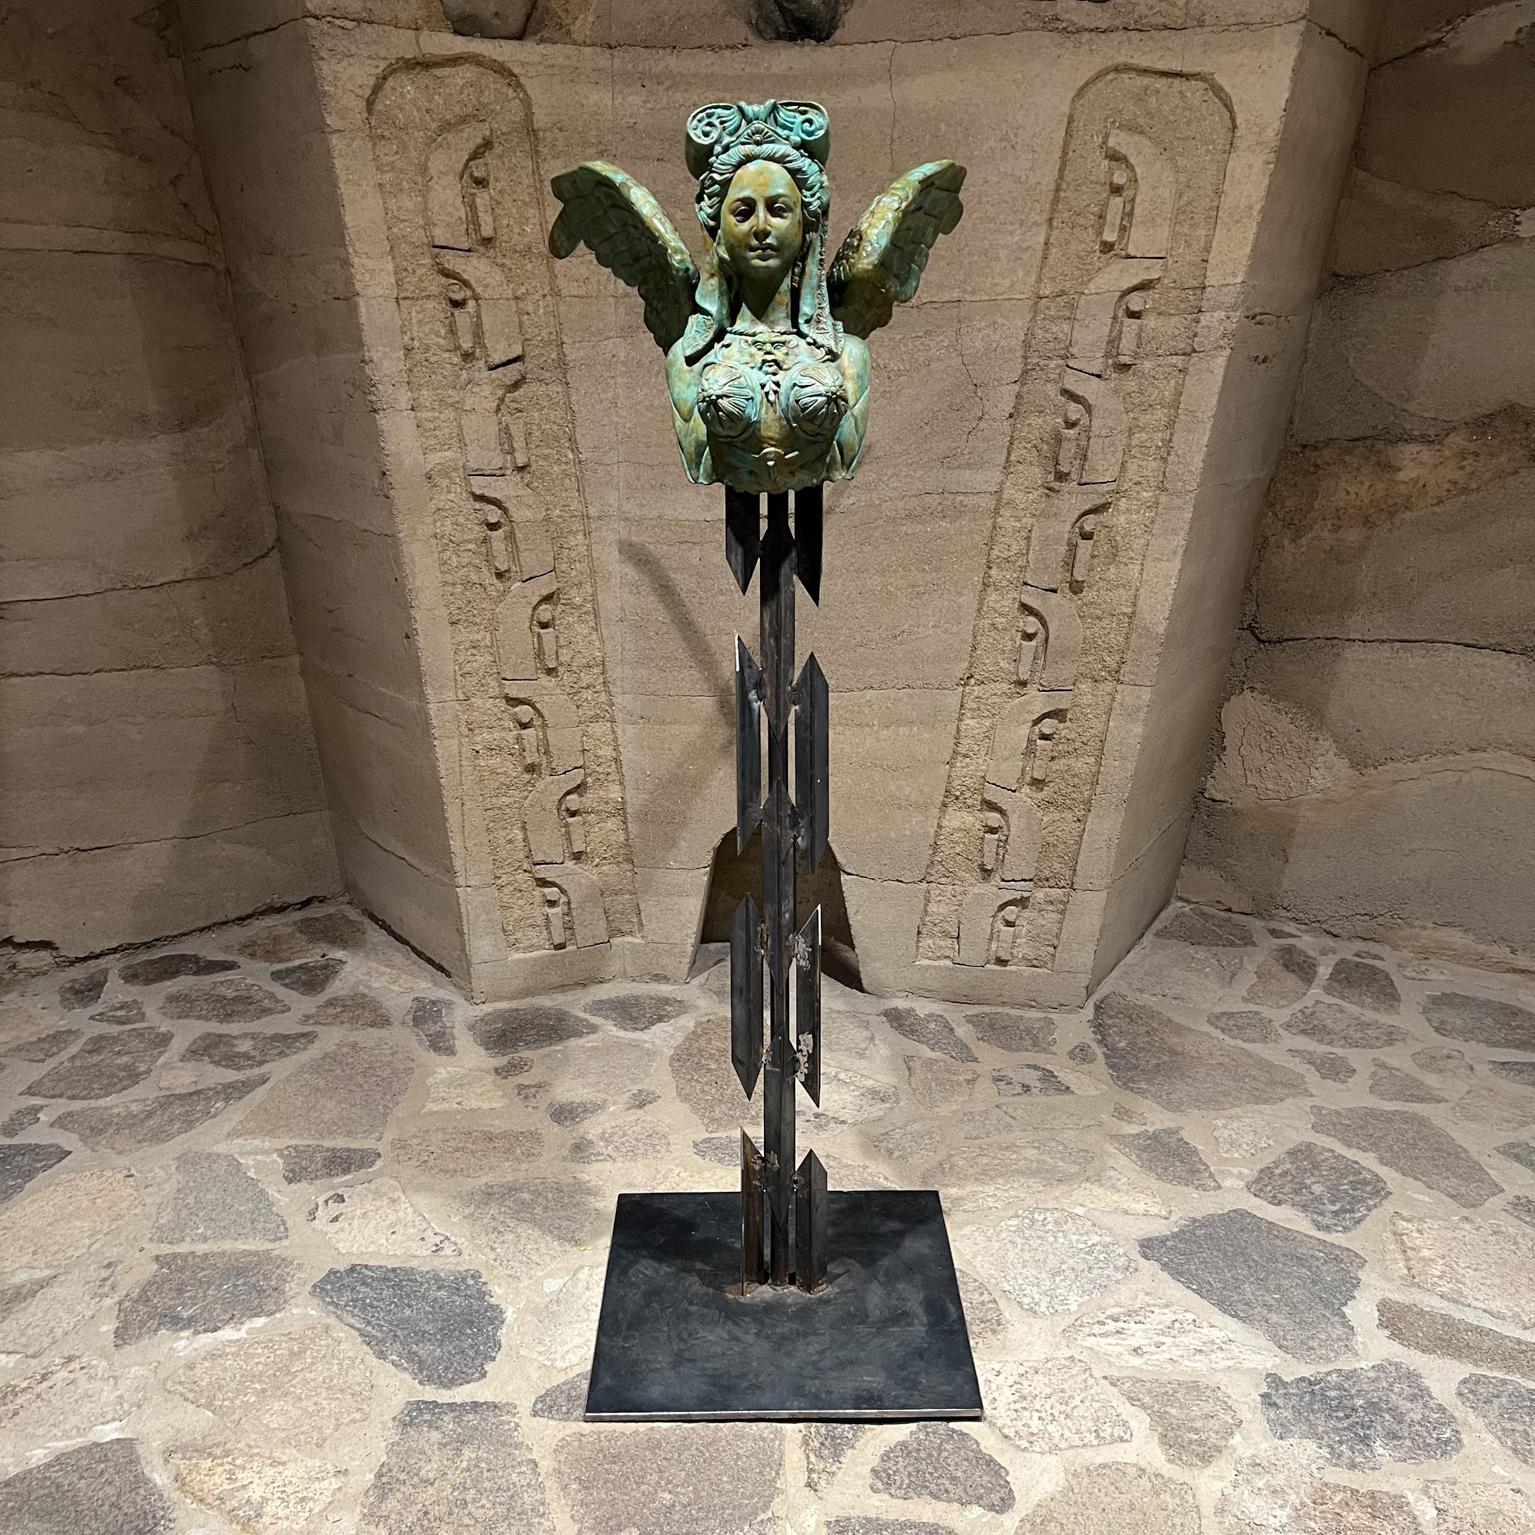 Greek mythology Sphinx imagery Bronze Sculpture female lion bust with wings
61.5 tall x 24.5 w x 34 d
Mounted on forged steel base.
Unsigned.
Original vintage condition. Verdigris patina.
Two more are available with different patination.
Consult